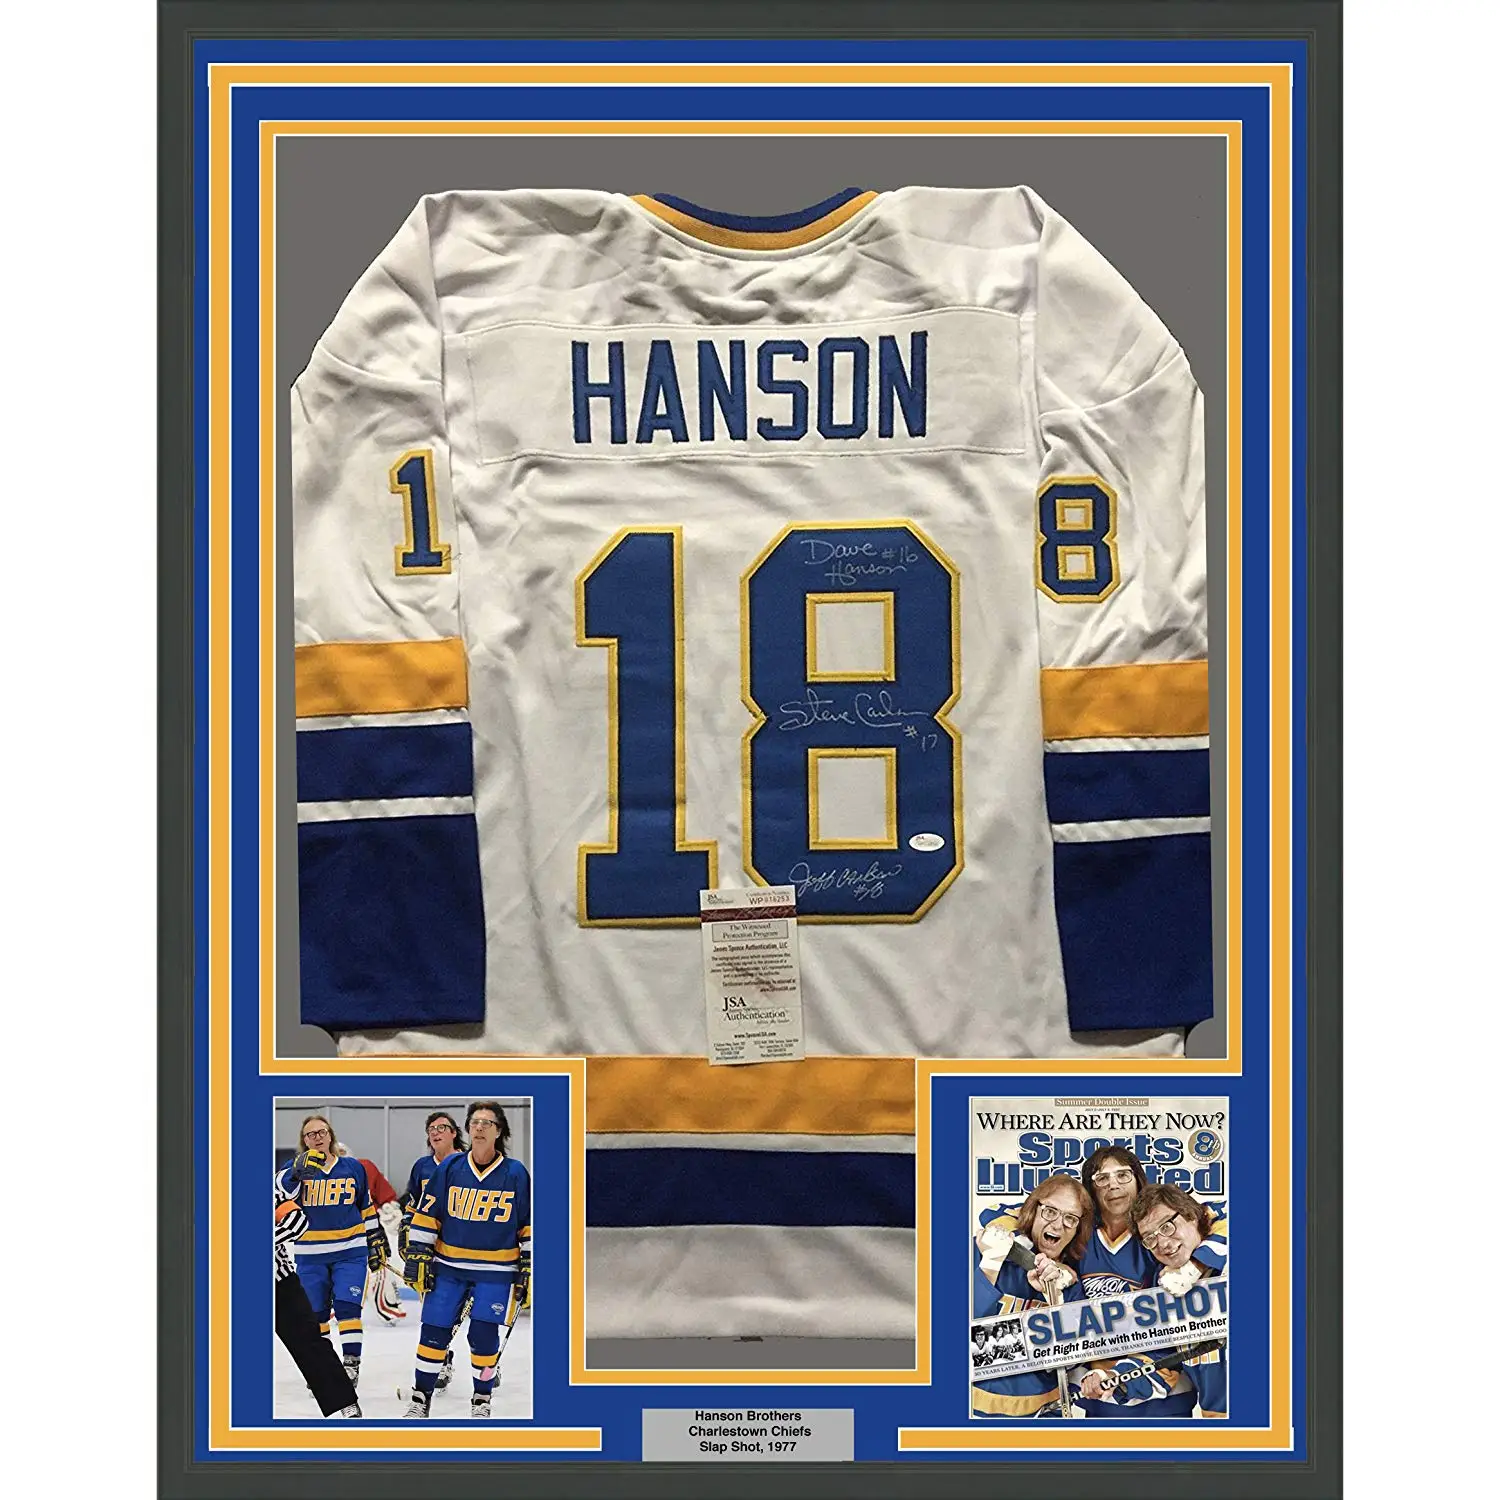 hanson brothers chiefs jersey